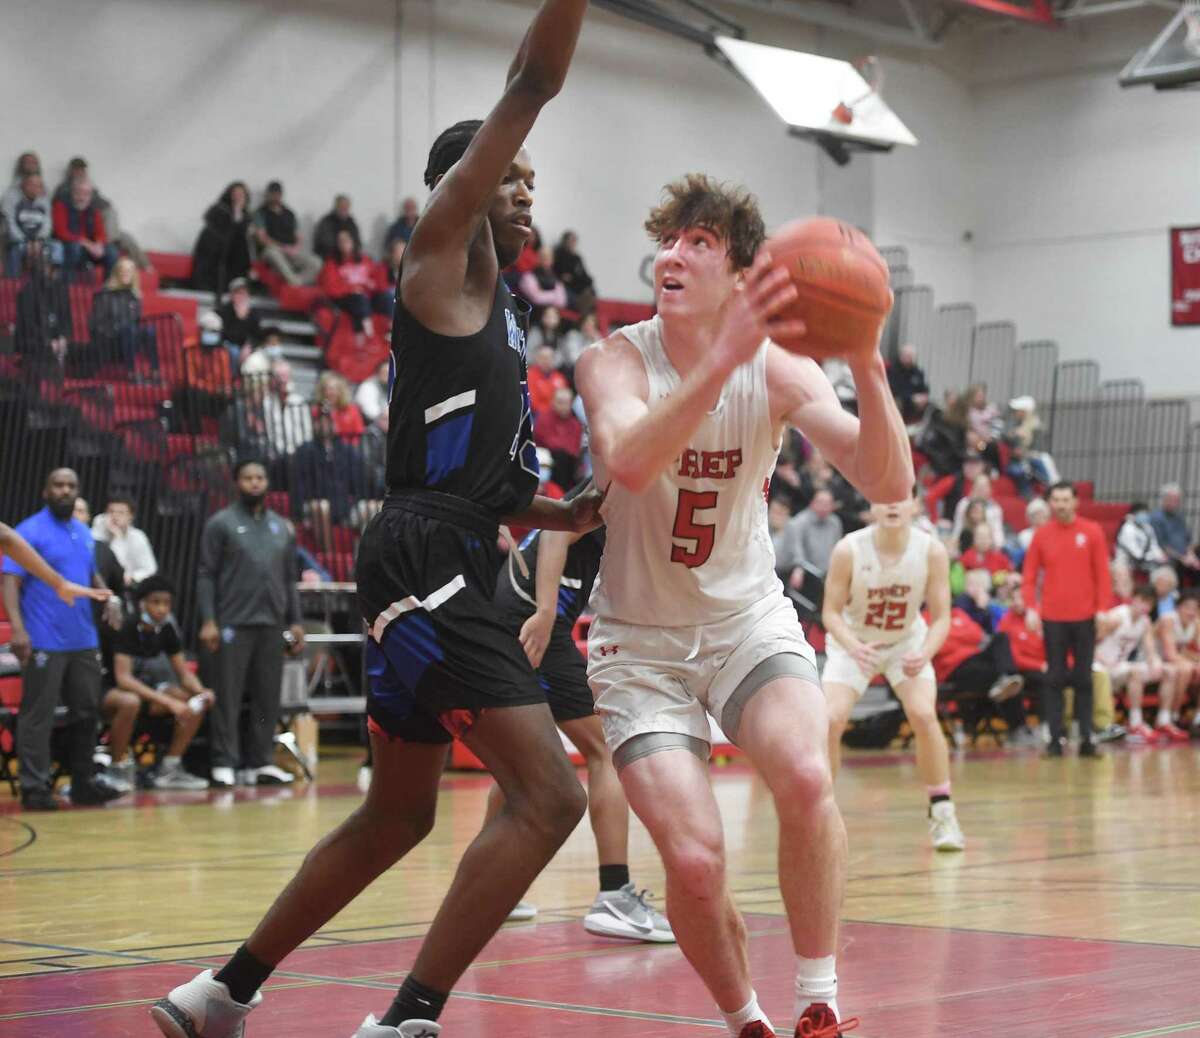 Fairfield Prep's Griffin Harding drives to the basket against West Haven defender Javaun Calhoun during their second round game in the CIAC 2022 State Boys Basketball Tournament at Fairfield Warde High School in Fairfield, Conn., on Thursday, March 10, 2022.